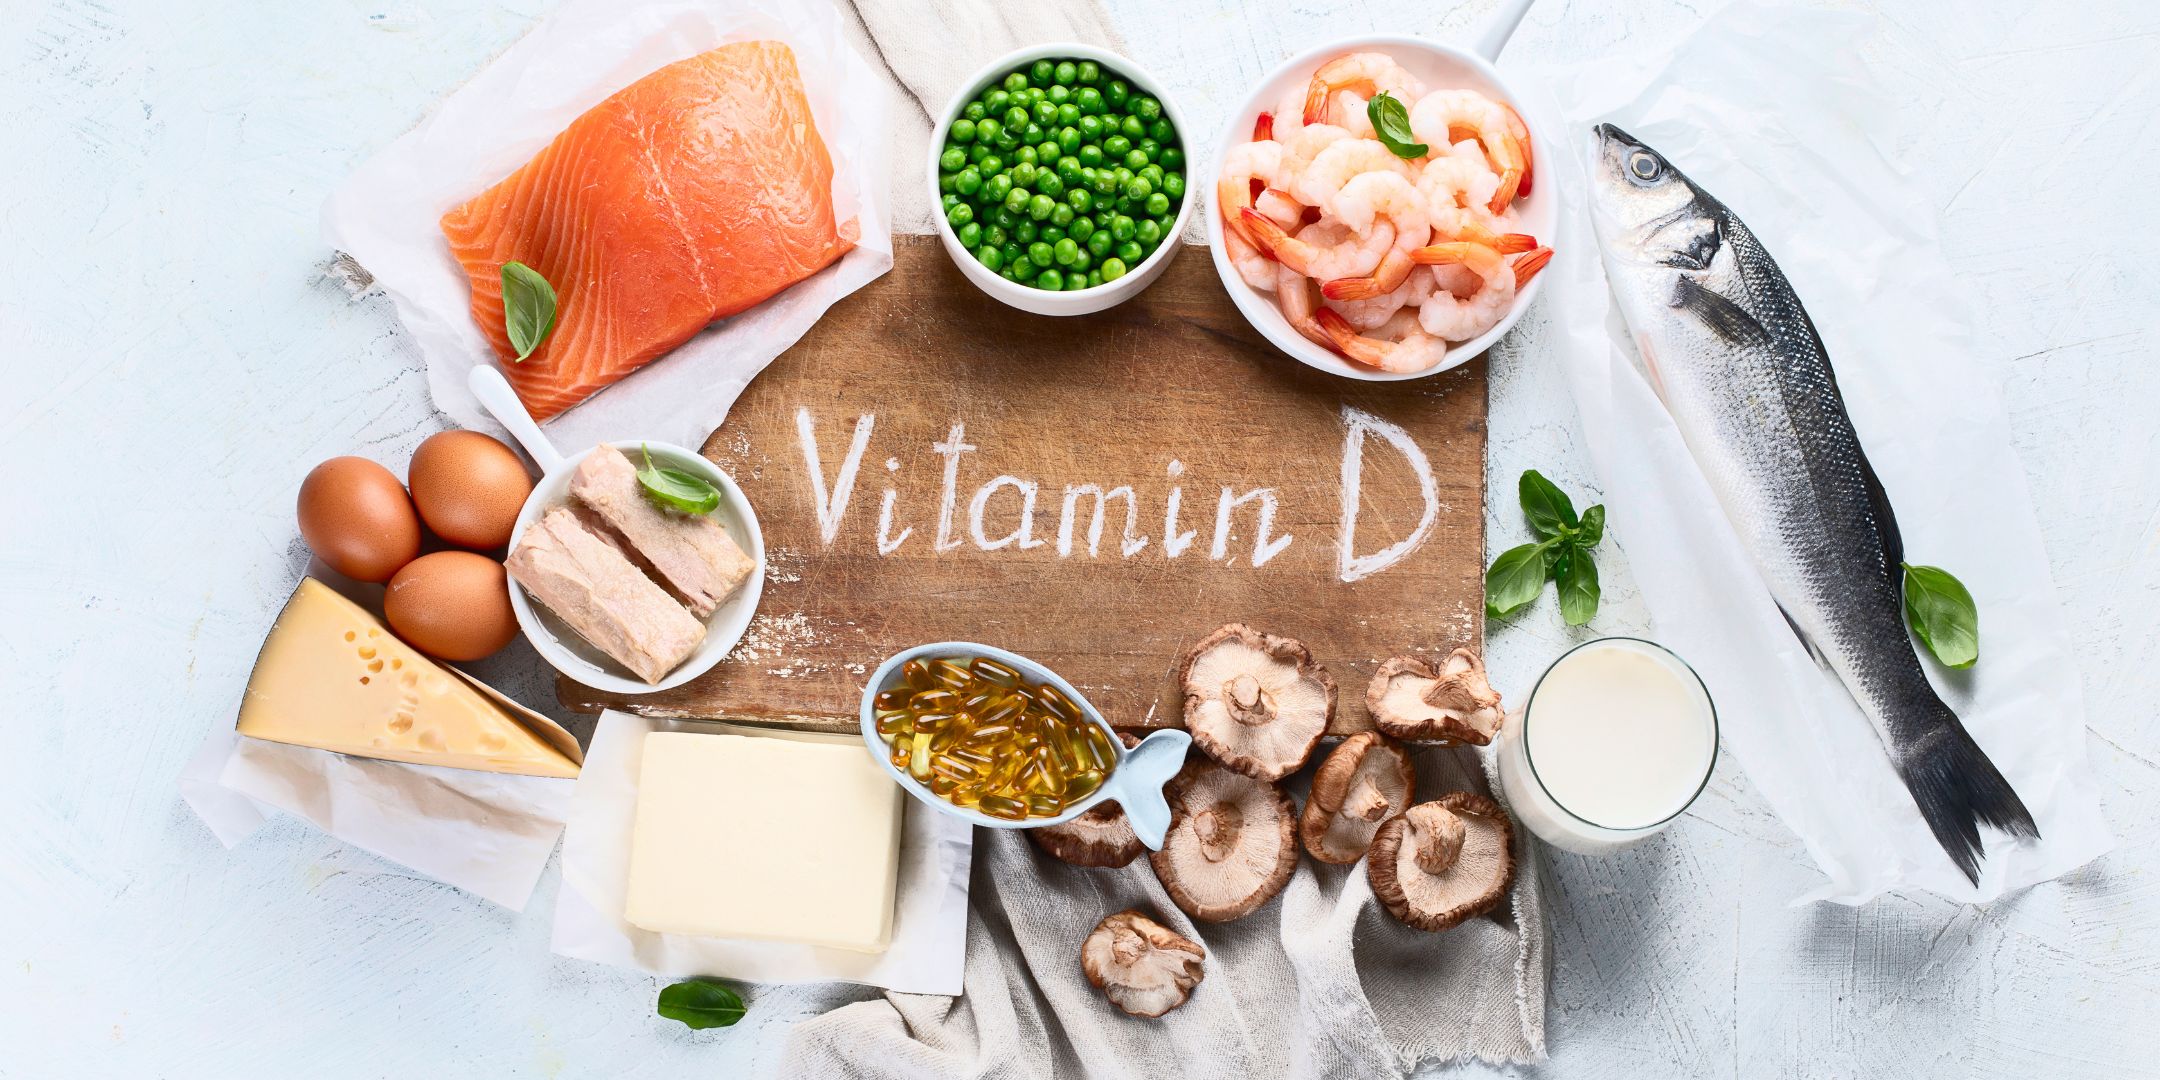 vitamin D sign surrounded by foods that contain vitamin D